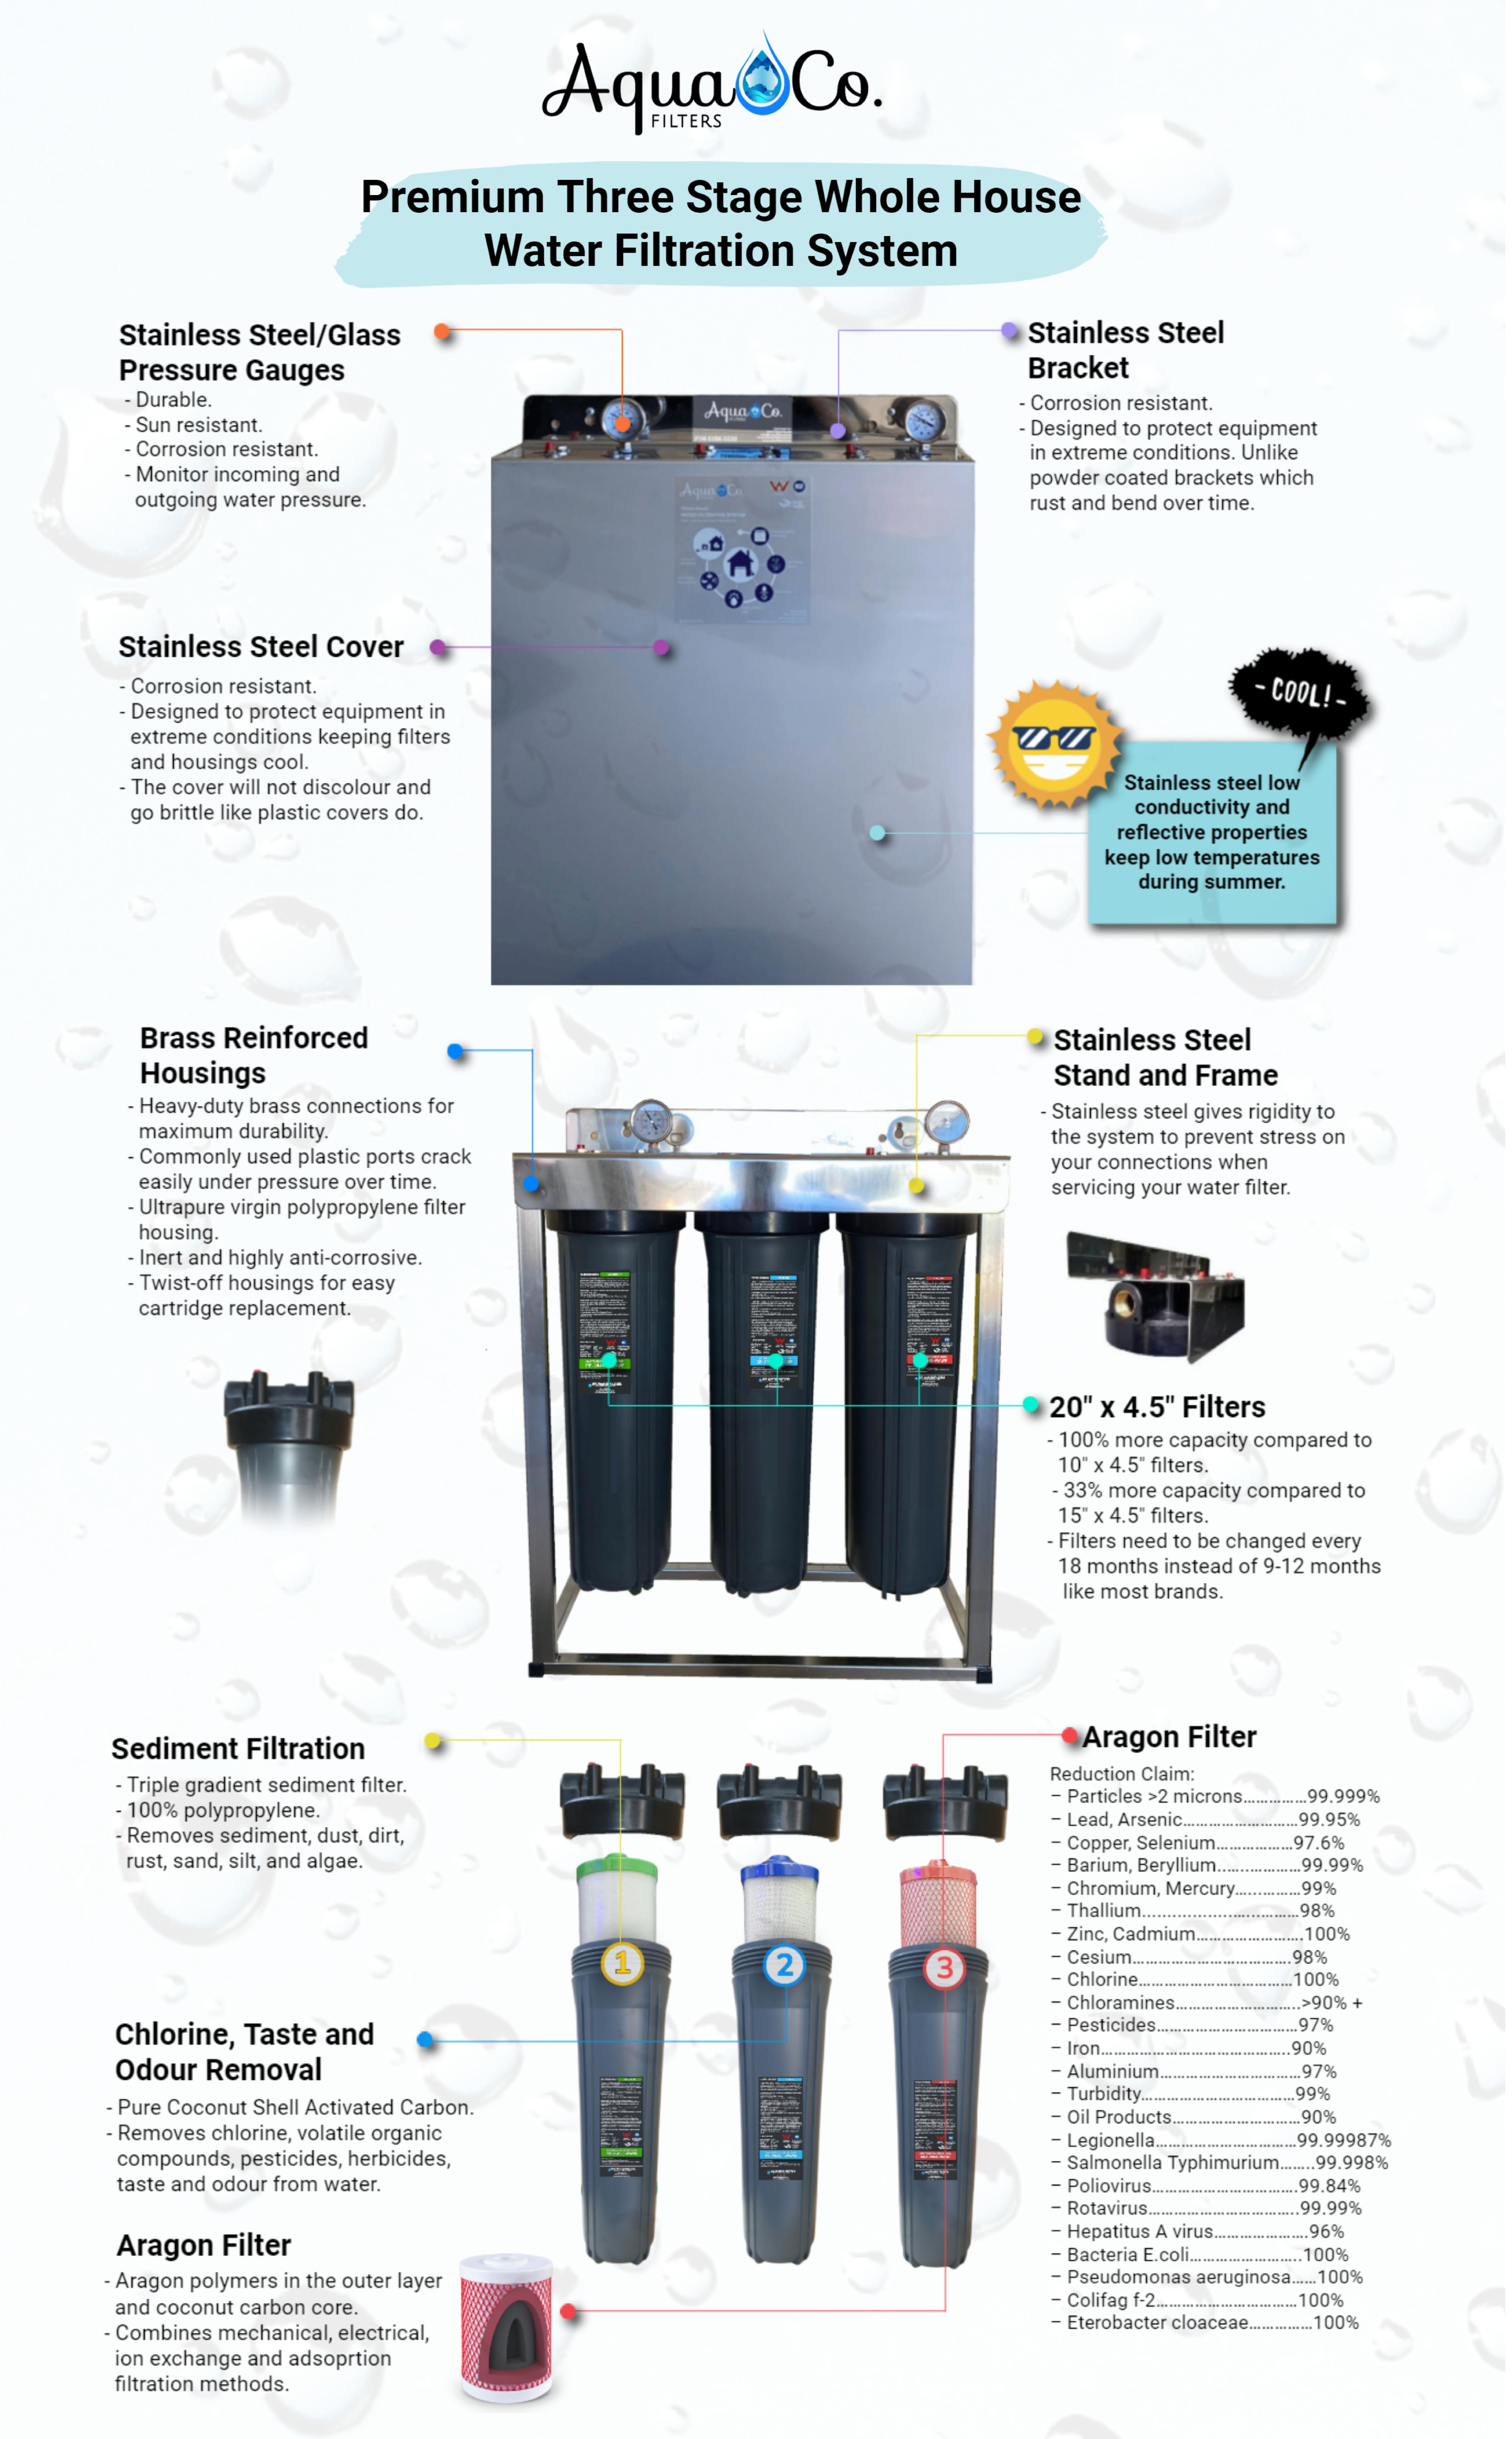 • The AquaCo Premium Three Stage Whole House Water Filter